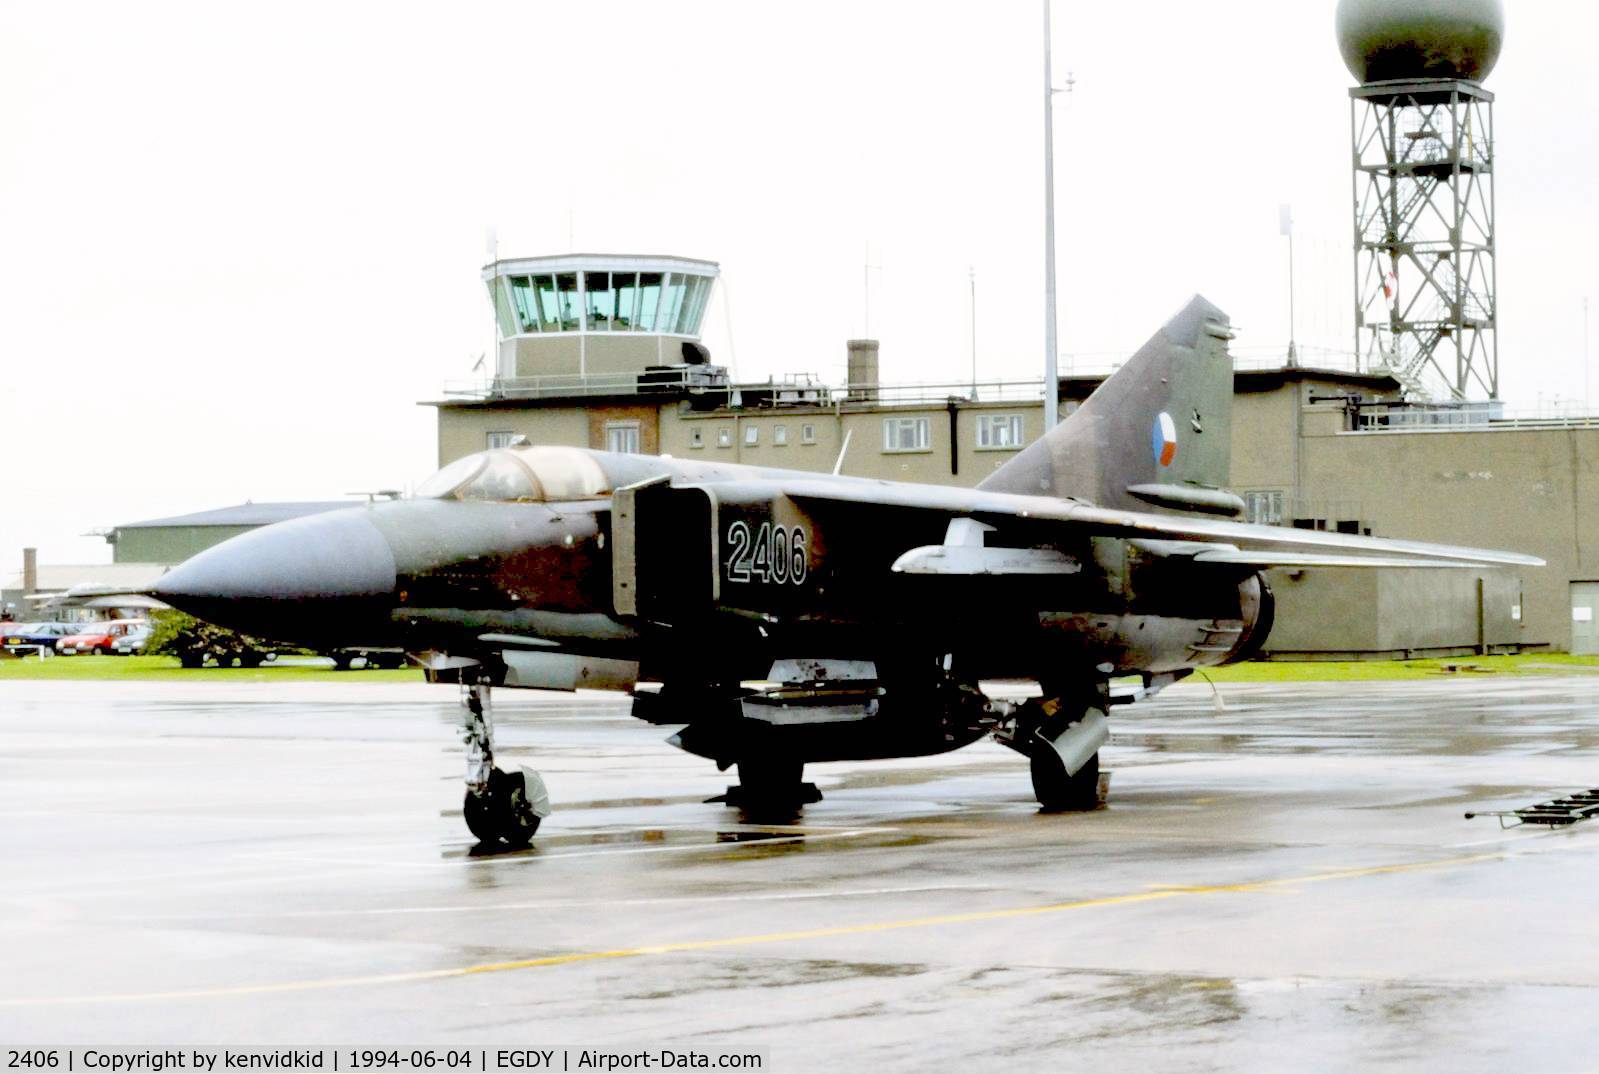 2406, Mikoyan-Gurevich MiG-23ML C/N 22406, On static display at the RNAS Yeovilton 1994 50th Anniversary of D Day photocall. It rained all day.